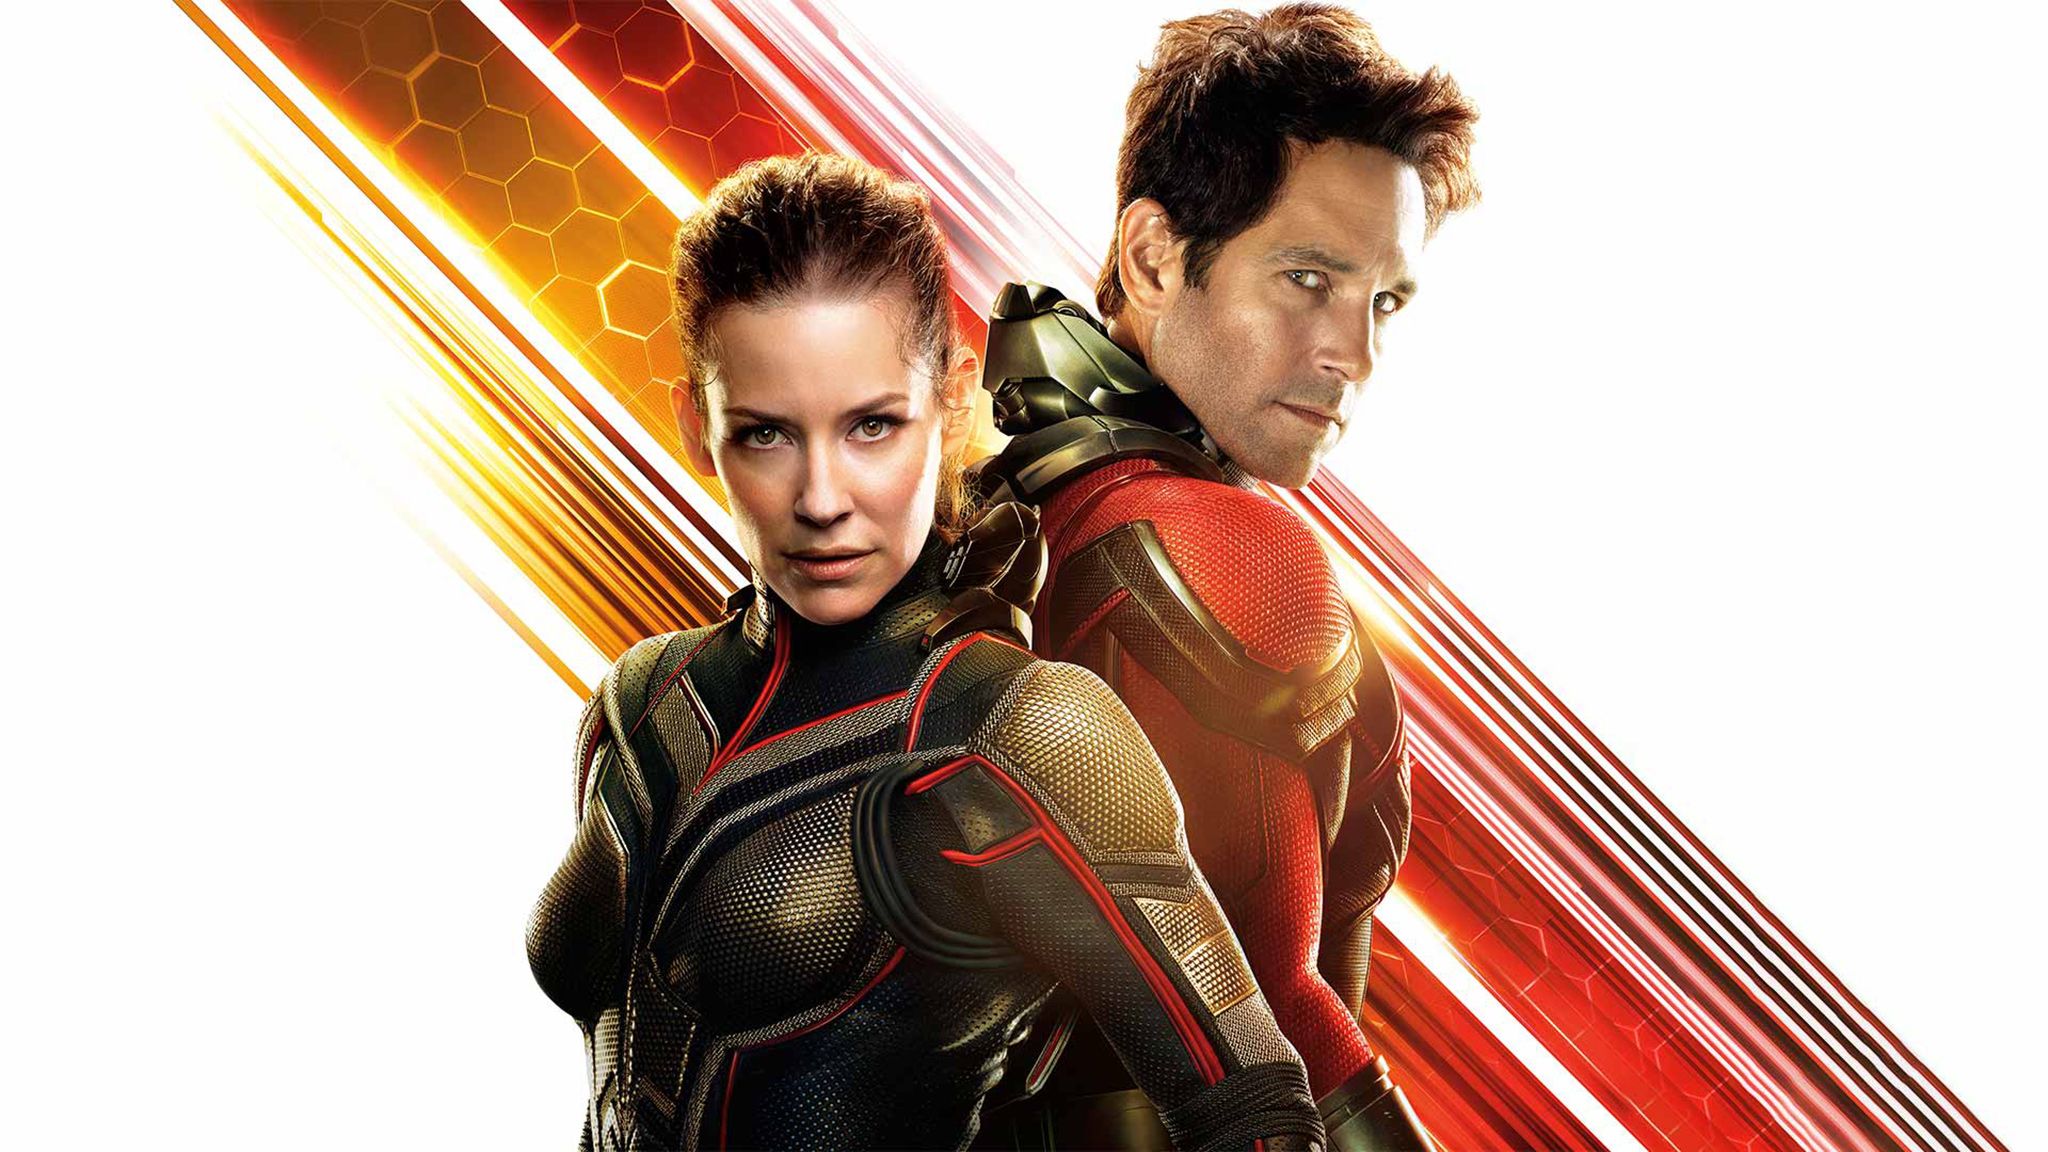 Dinner, Shopping & A Movie: Ant Man And The Wasp. The Avalon Theatre, Grand Junction, Colorado